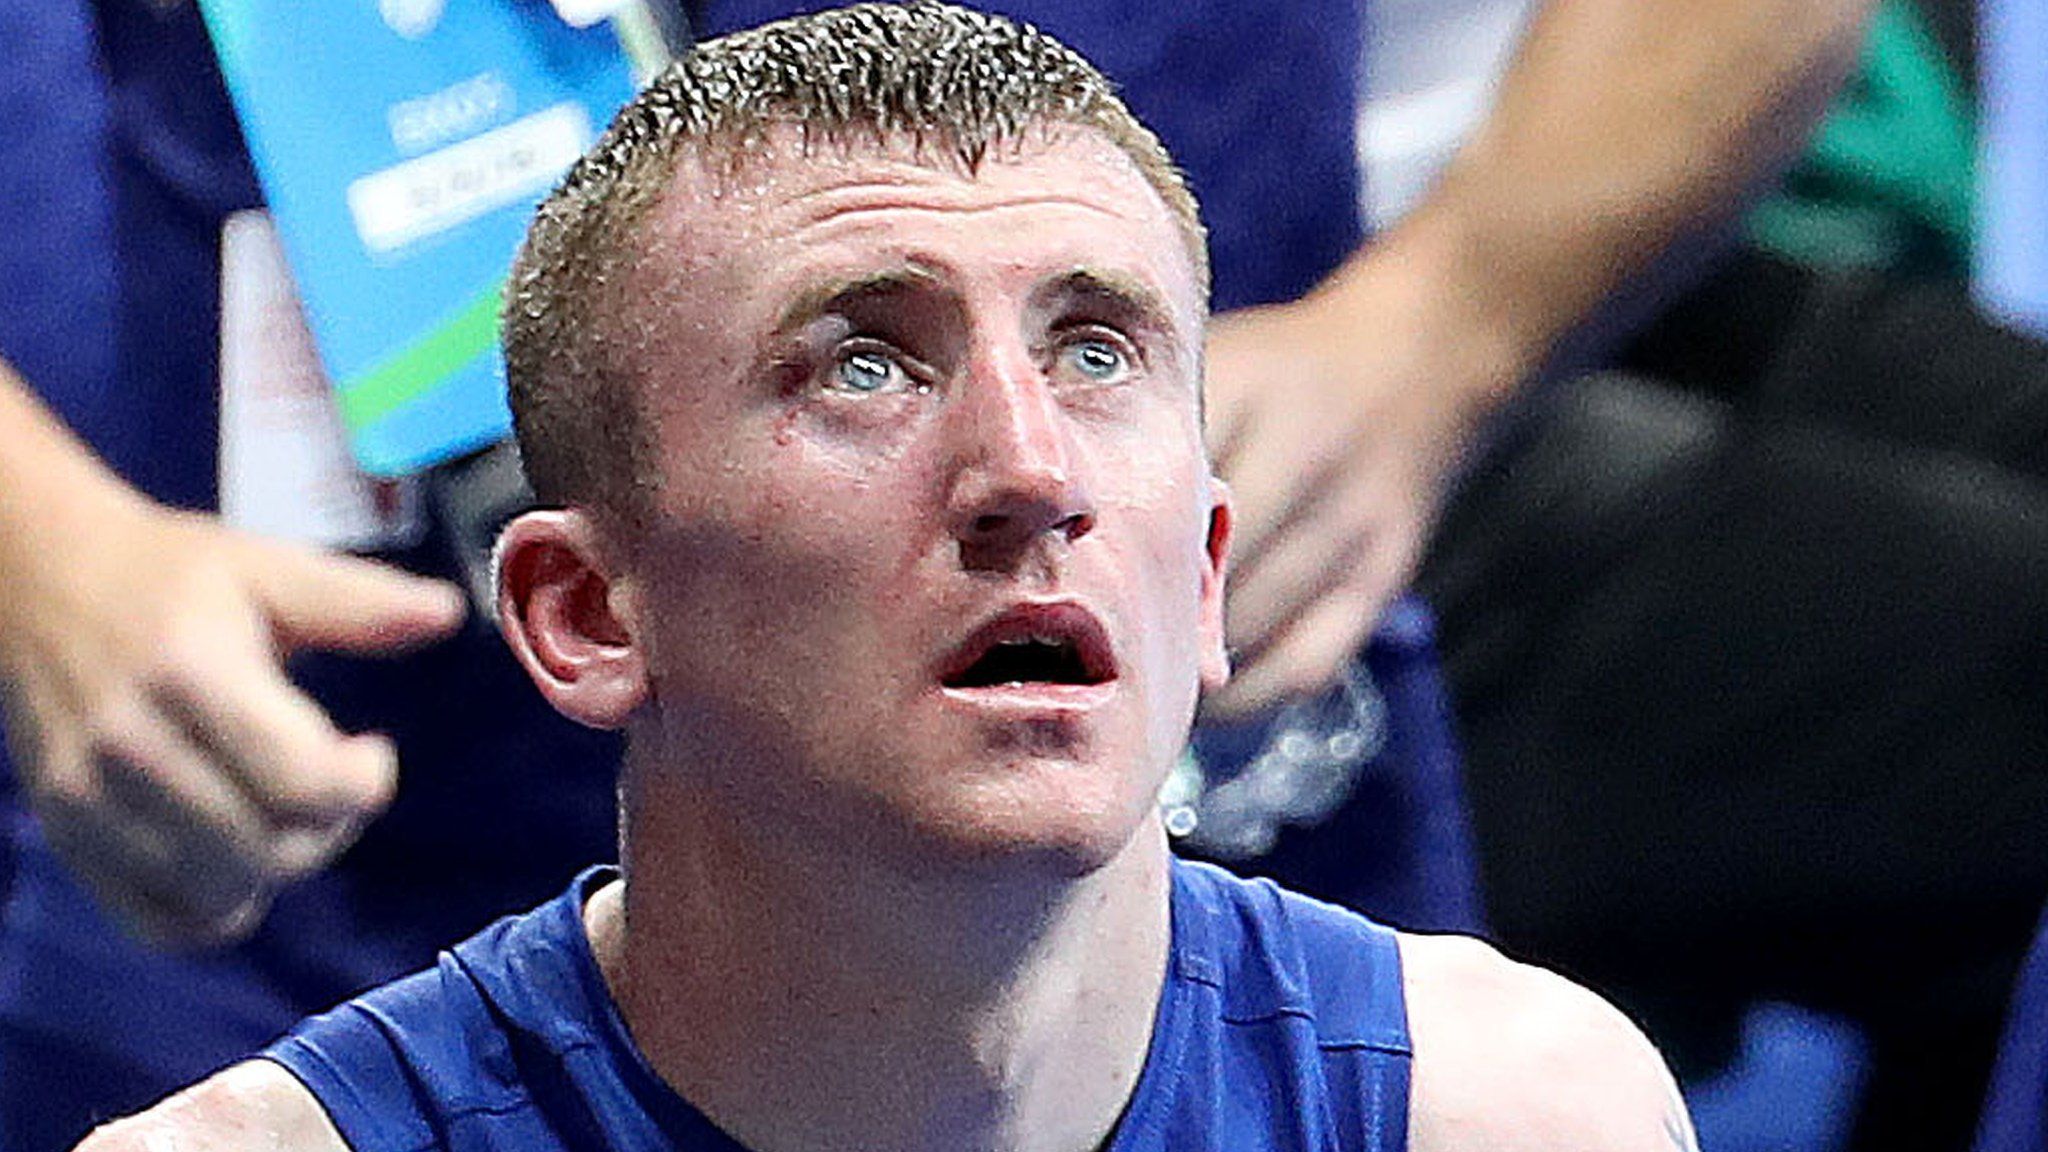 Paddy Barnes suffered a shock defeat in the Olympic flyweight division